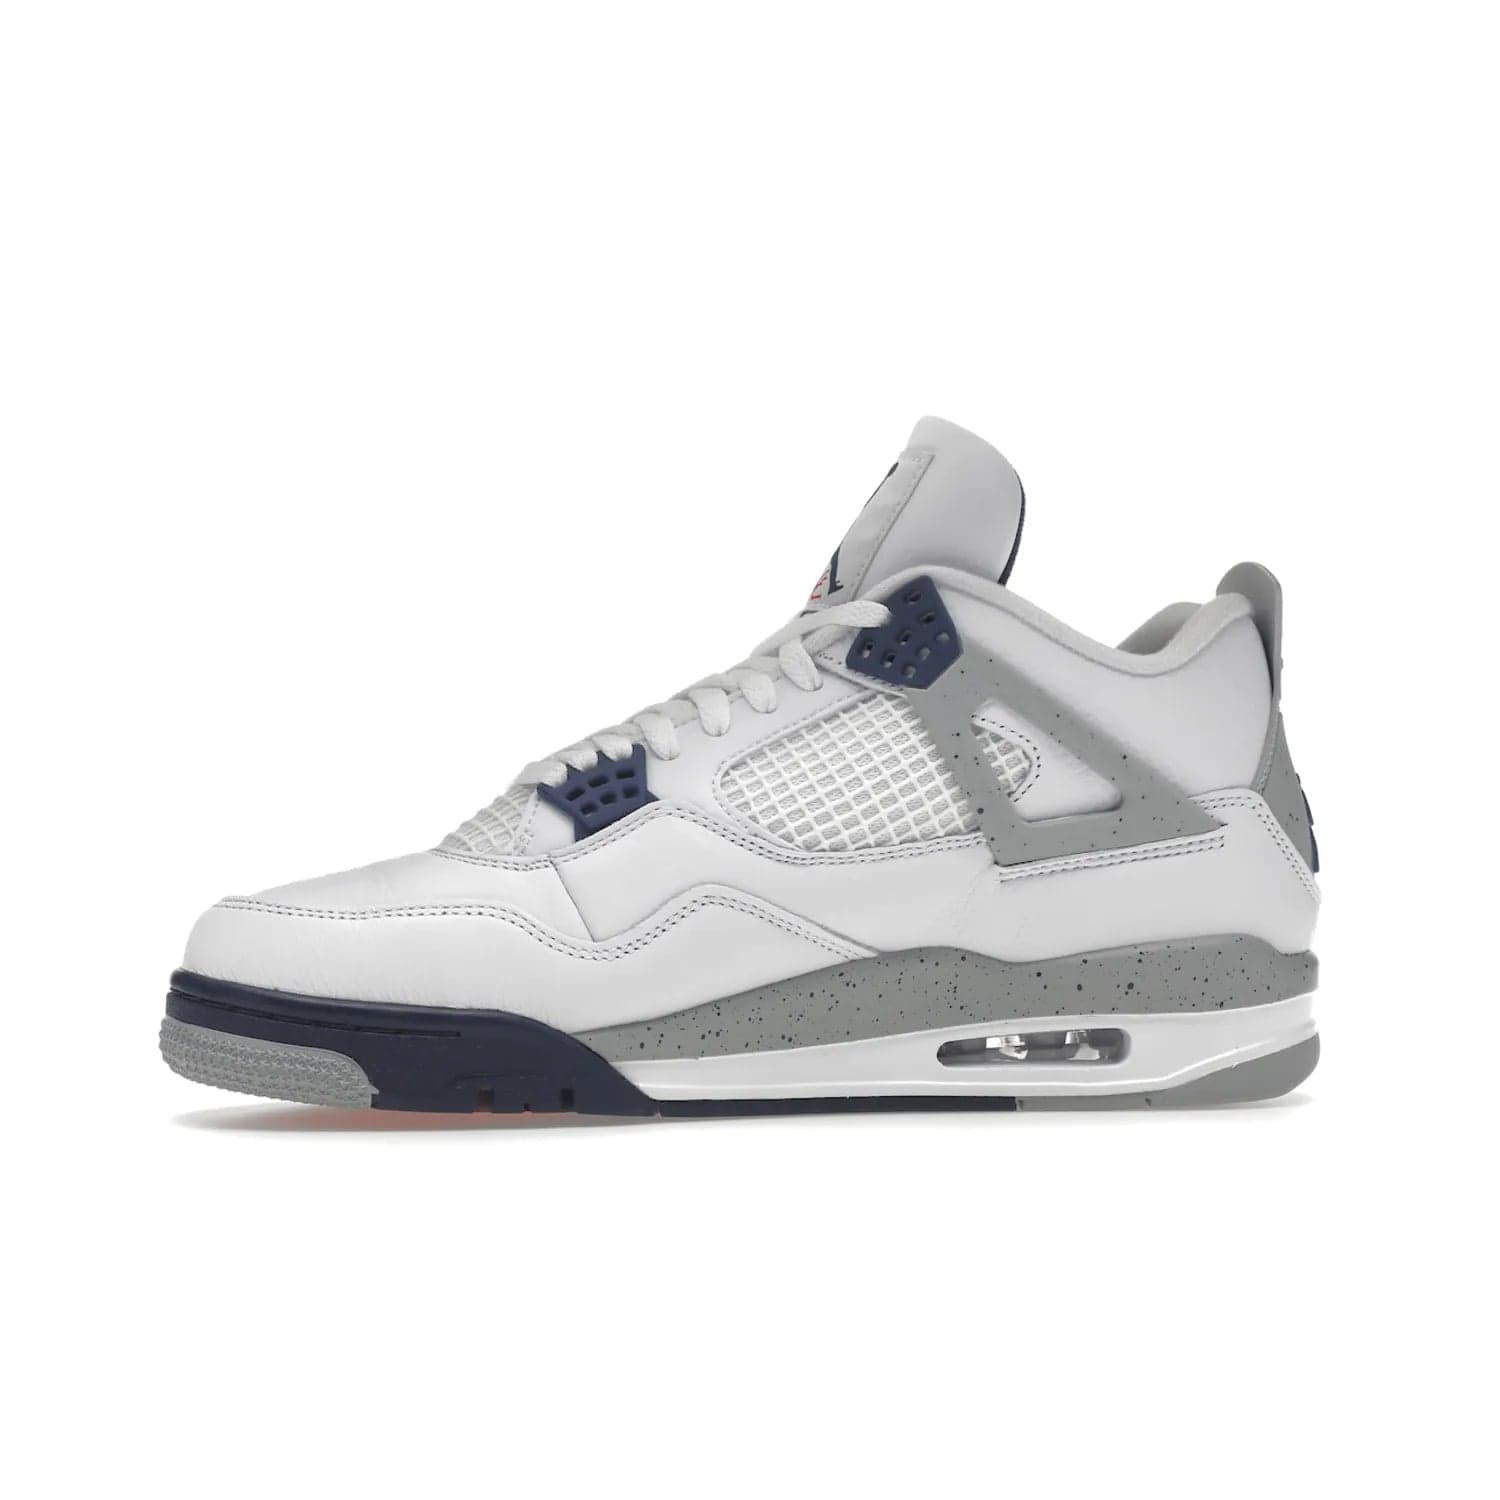 Jordan 4 Retro Midnight Navy - Image 18 - Only at www.BallersClubKickz.com - Shop the Air Jordan Retro 4 White Midnight Navy. Stand out with a classic white leather upper, black support wings, midnight navy eyelets, and Crimson Jumpman tongue tag. Unbeatable comfort with two-tone polyurethane midsole with encapsulated Air technology. Get yours before October 29th, 2022.